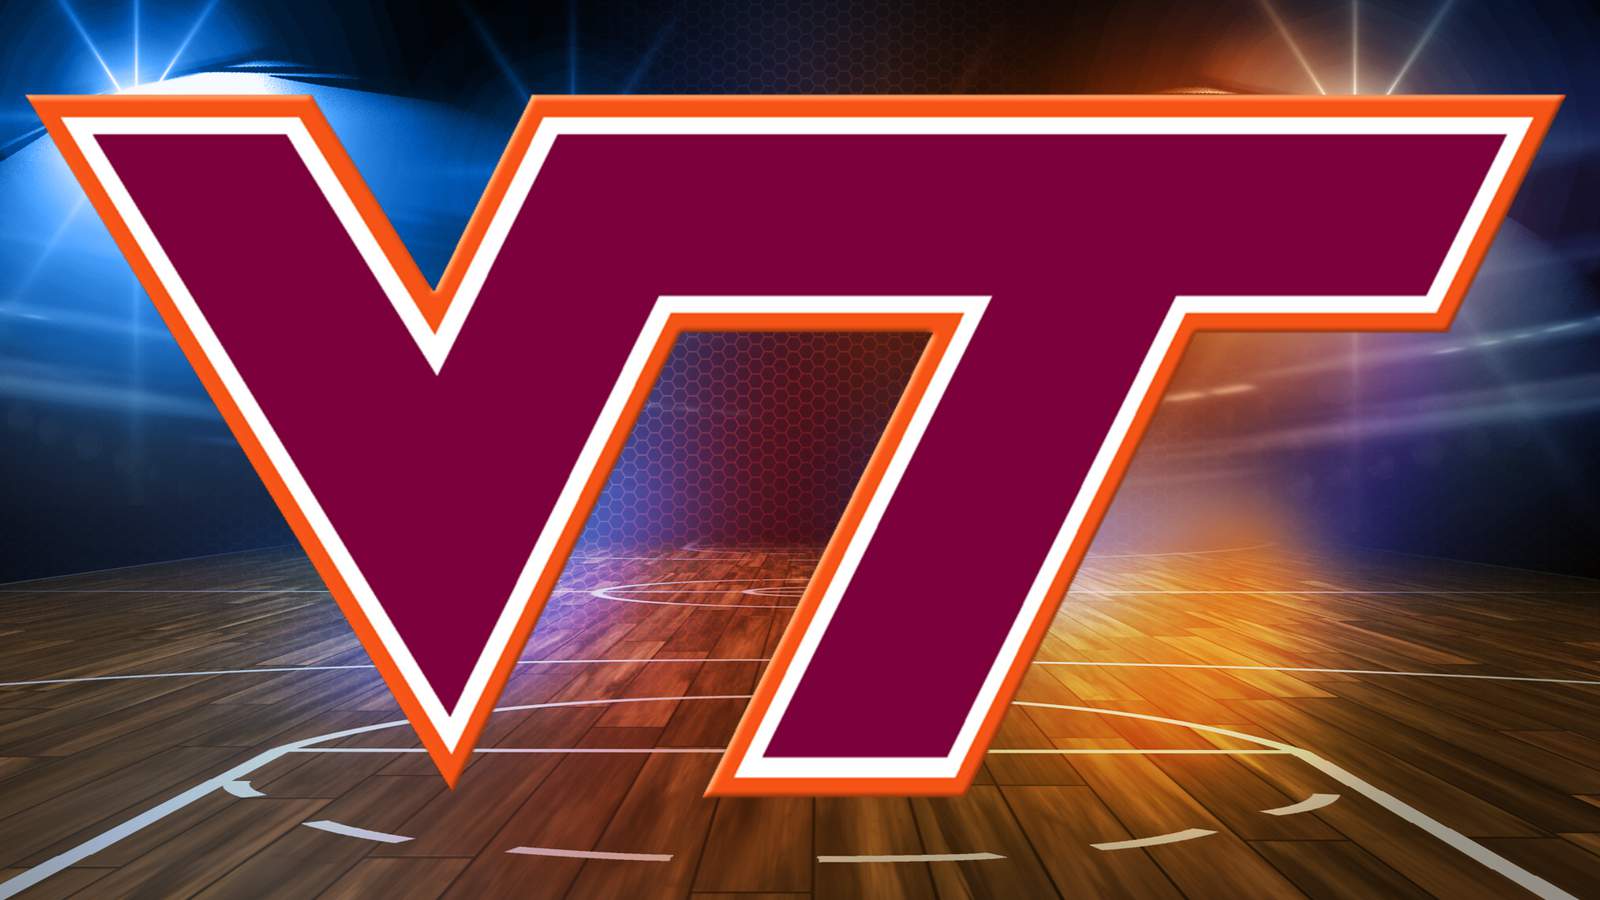 Alleyne’s career game carries Virginia Tech over Chattanooga